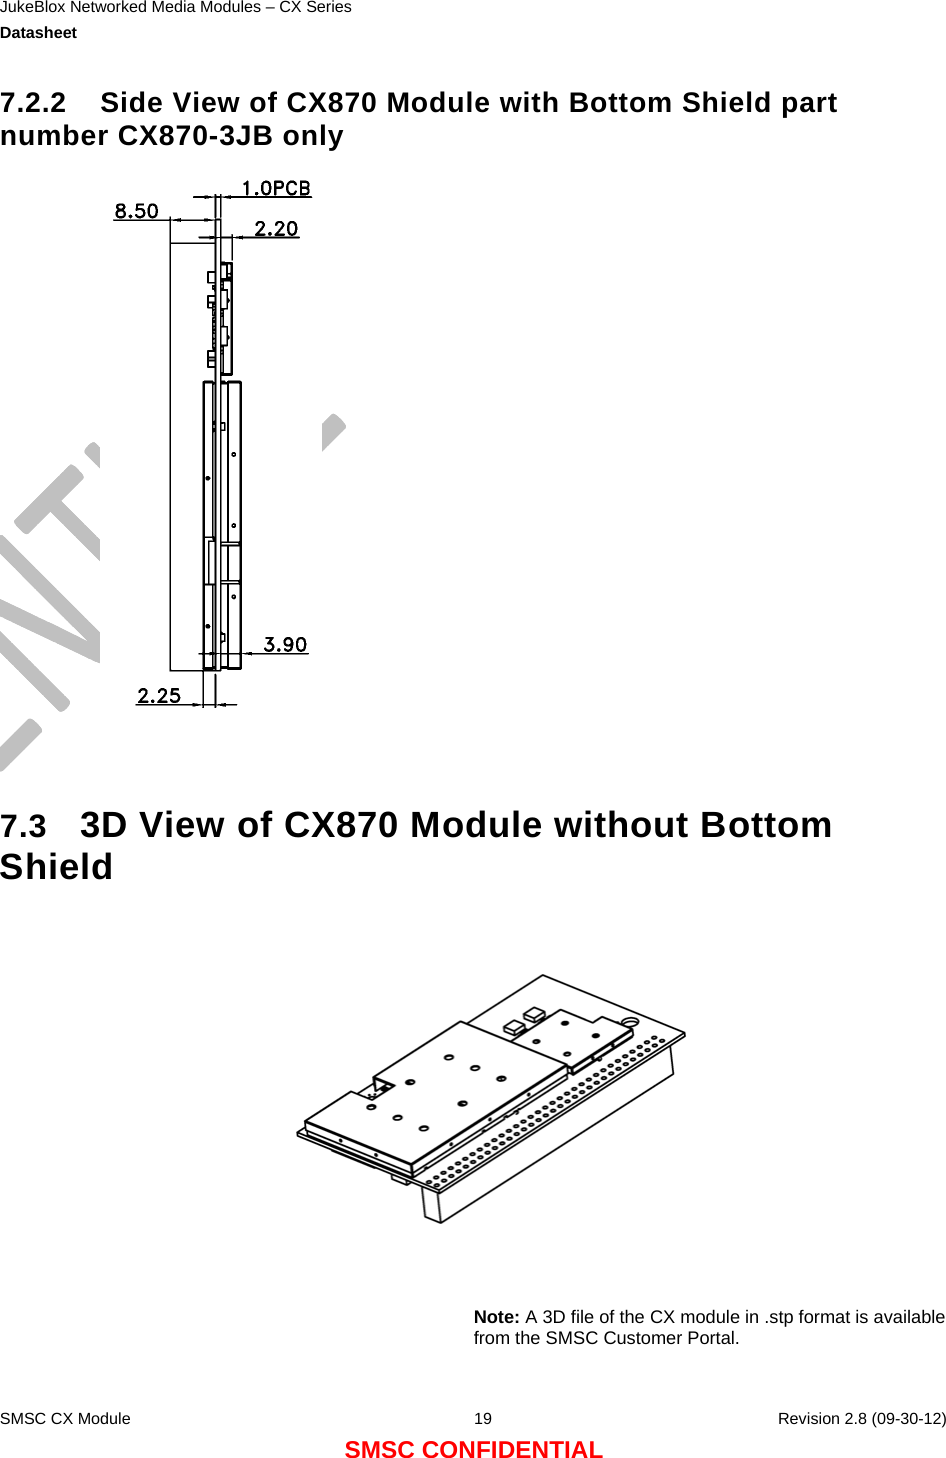 JukeBlox Networked Media Modules – CX Series  Datasheet    SMSC CX Module  19    Revision 2.8 (09-30-12) SMSC CONFIDENTIAL 7.2.2  Side View of CX870 Module with Bottom Shield part number CX870-3JB only    7.3  3D View of CX870 Module without Bottom Shield      Note: A 3D file of the CX module in .stp format is available from the SMSC Customer Portal.  